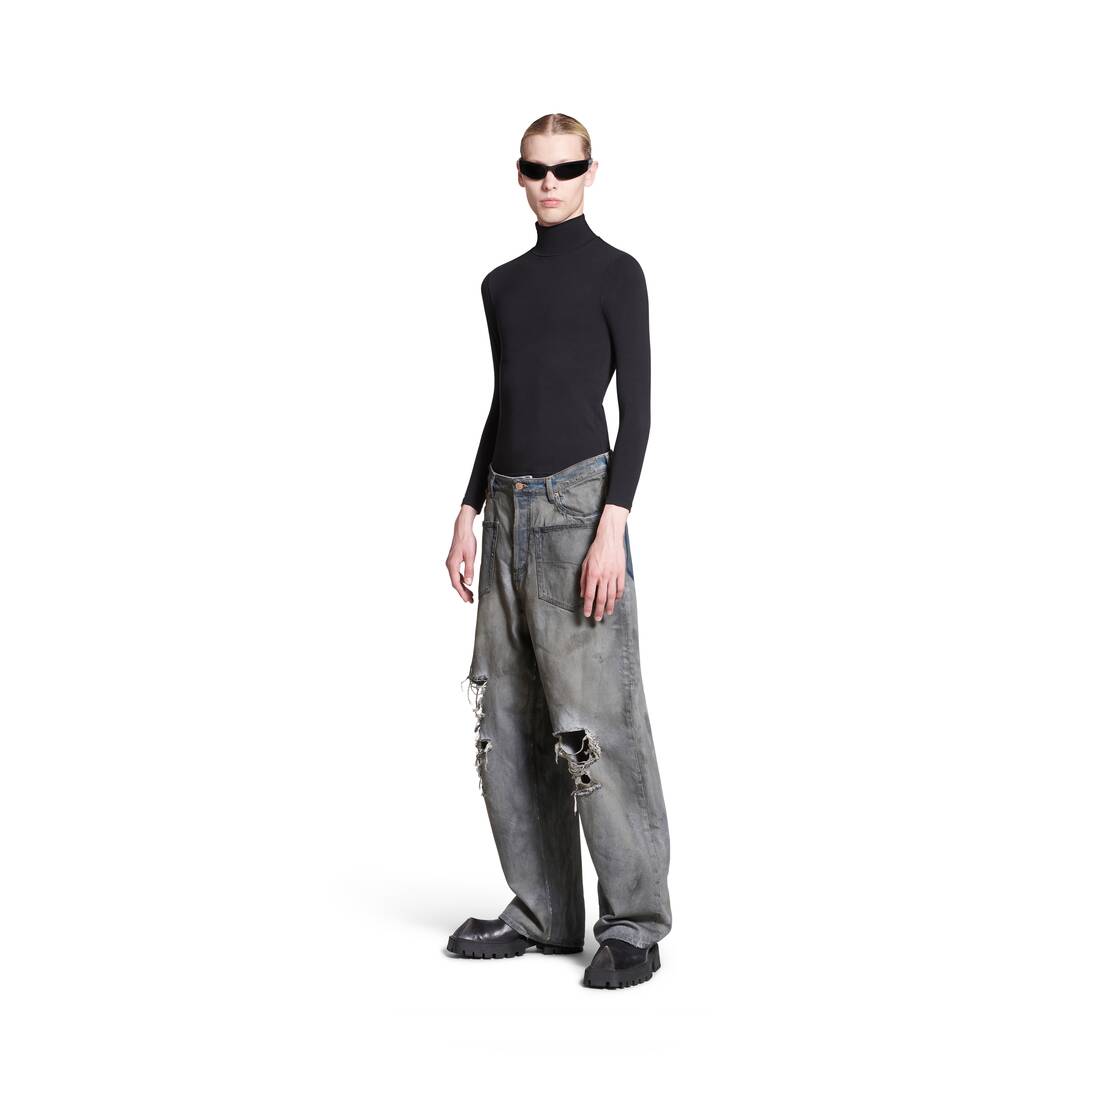 Outline Baggy Sweatpants in Black Faded